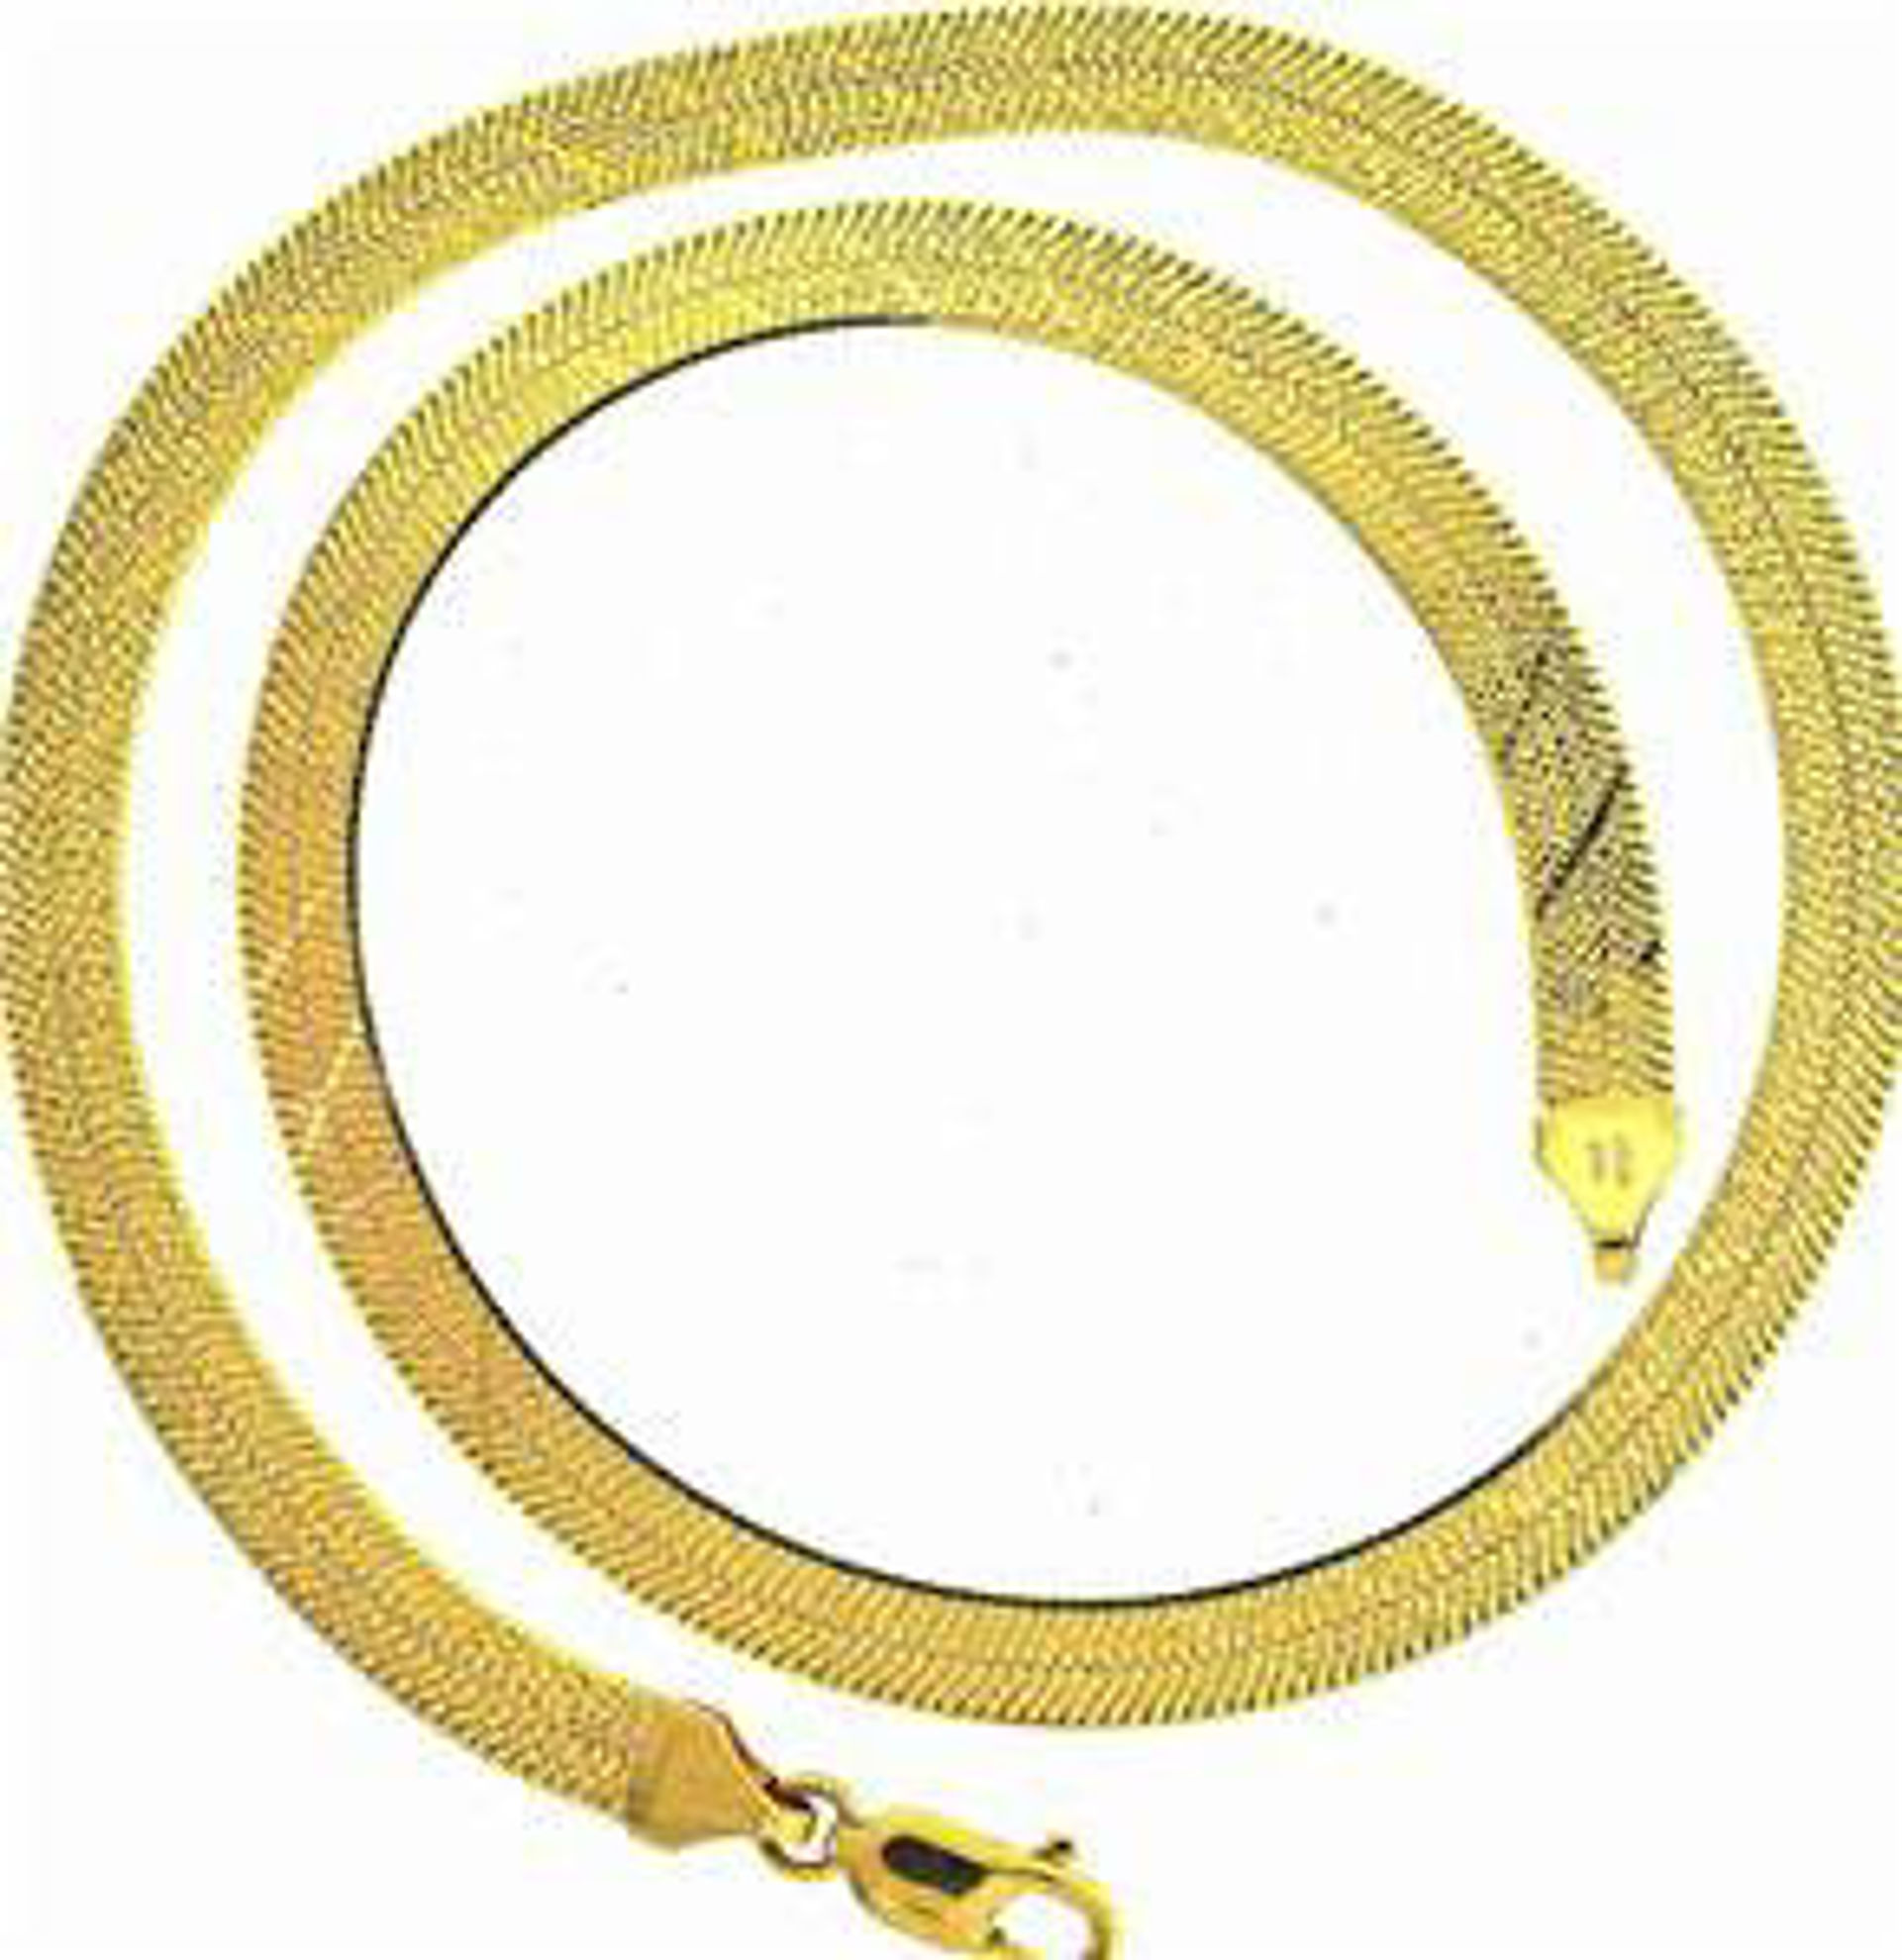 Picture of Chains 14kt-9.0 DWT, 14.0 Grams